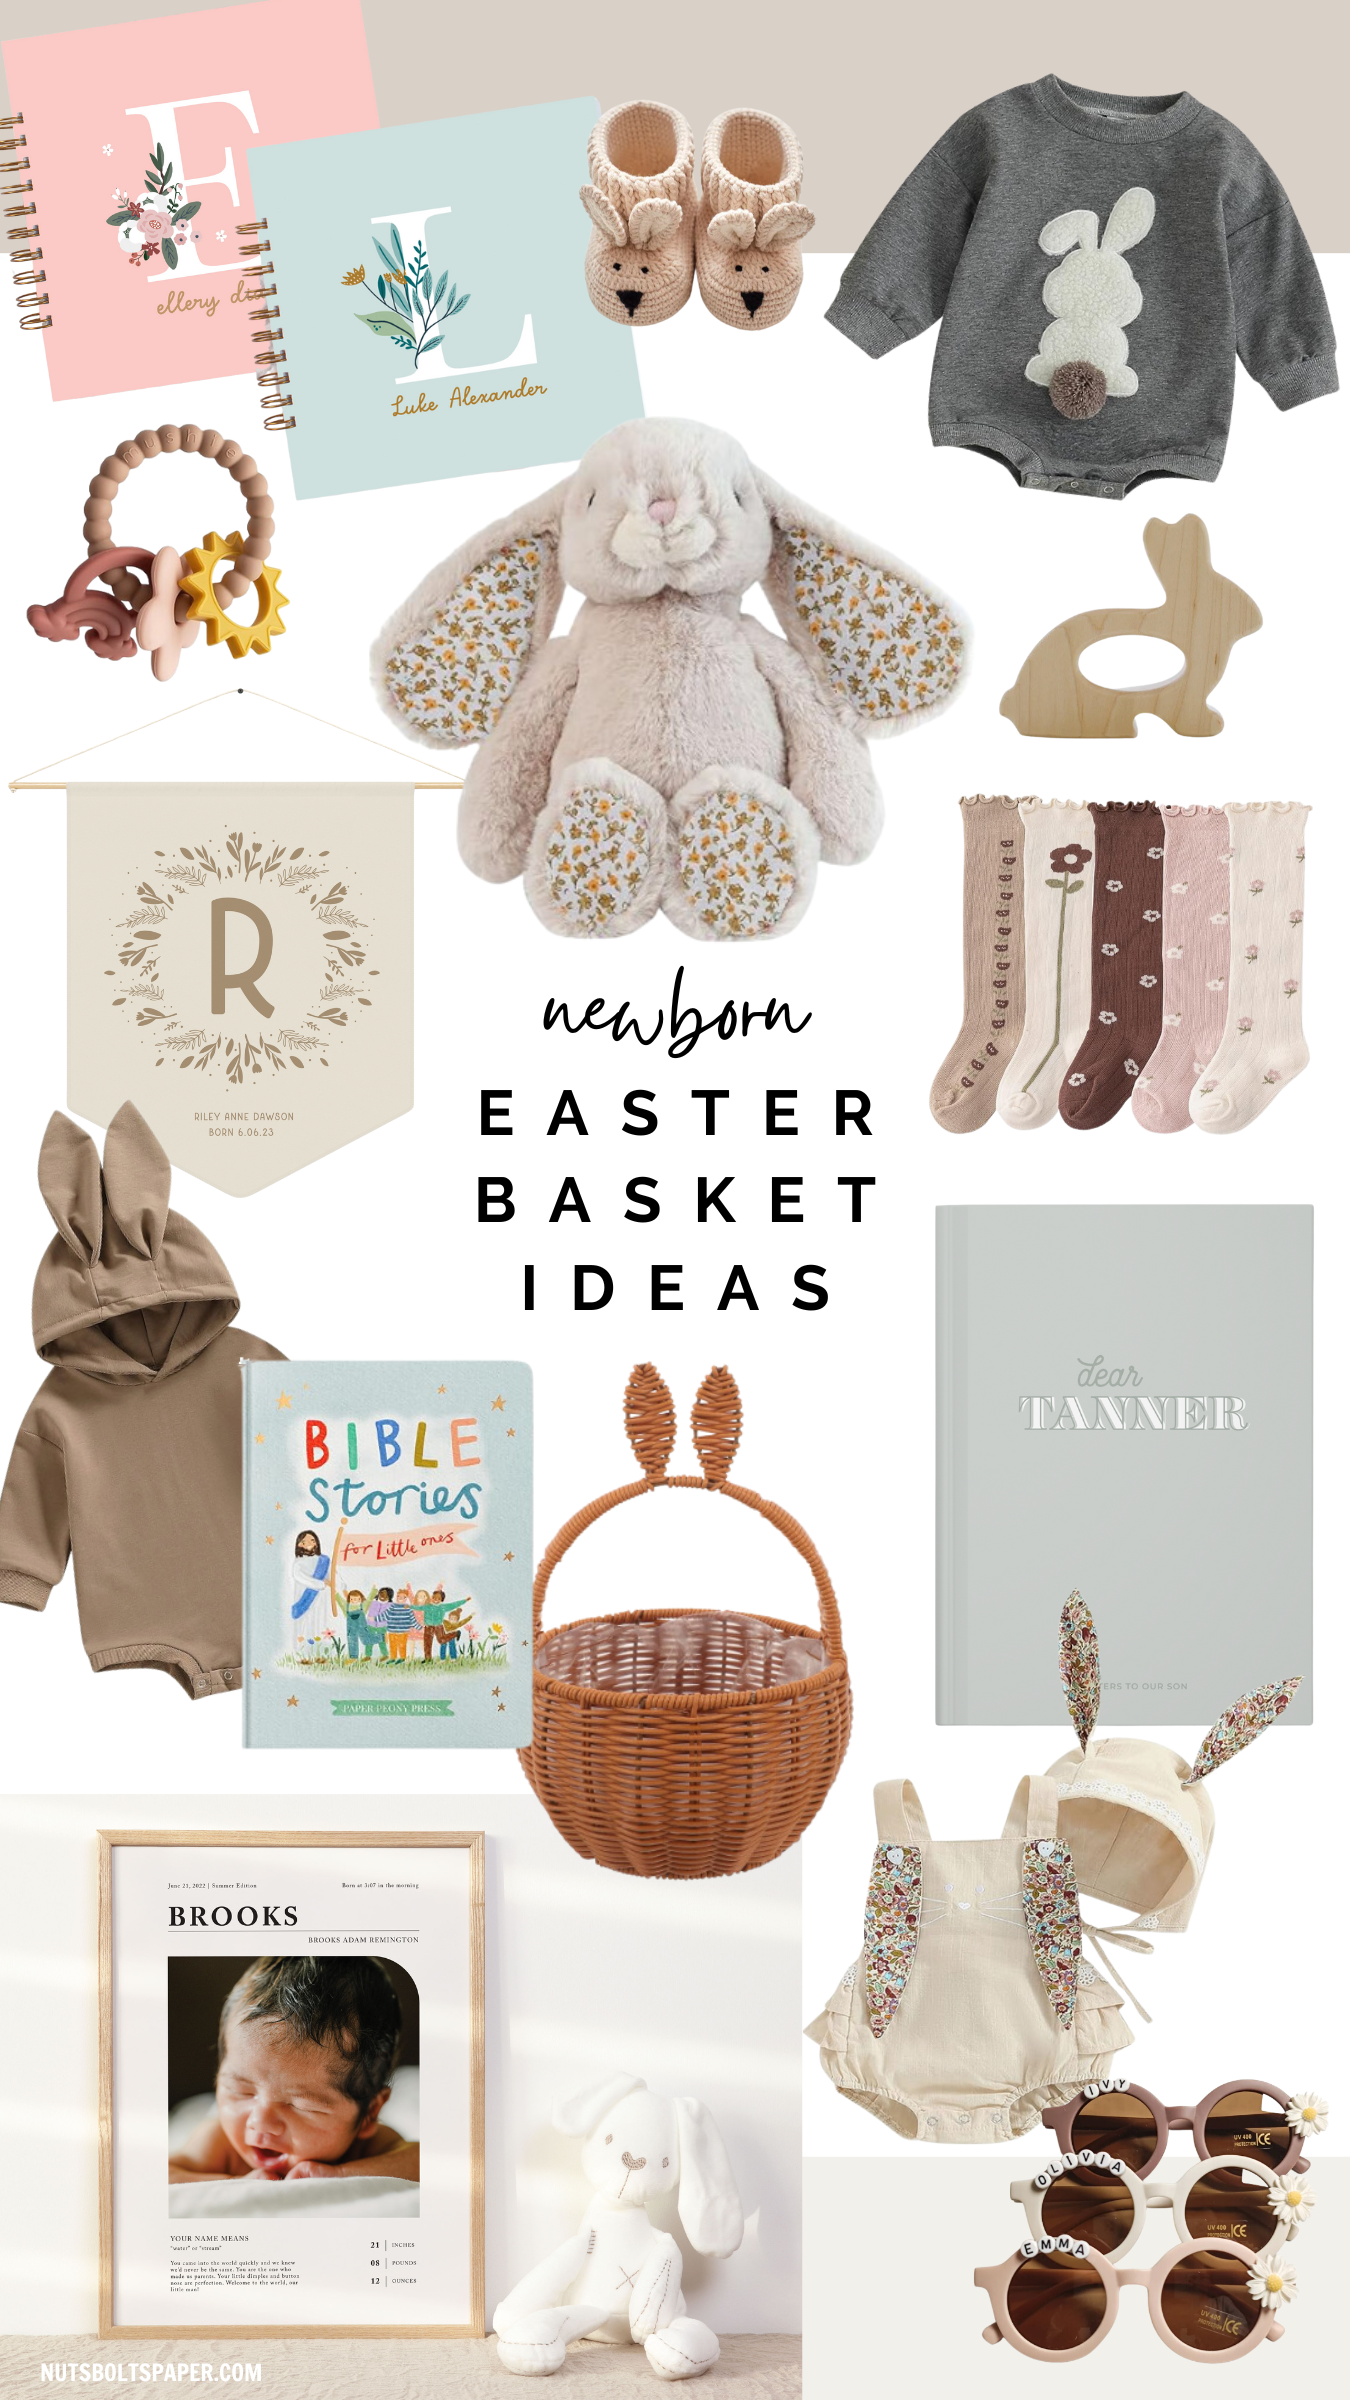 newborn baby easter outfit, newborn baby easter basket, newborn baby easter basket ideas, newborn baby easter basket gifts, newborn baby easter gift ideas, baby easter basket toys gifts ideas, baby easter basket stuffers fillers